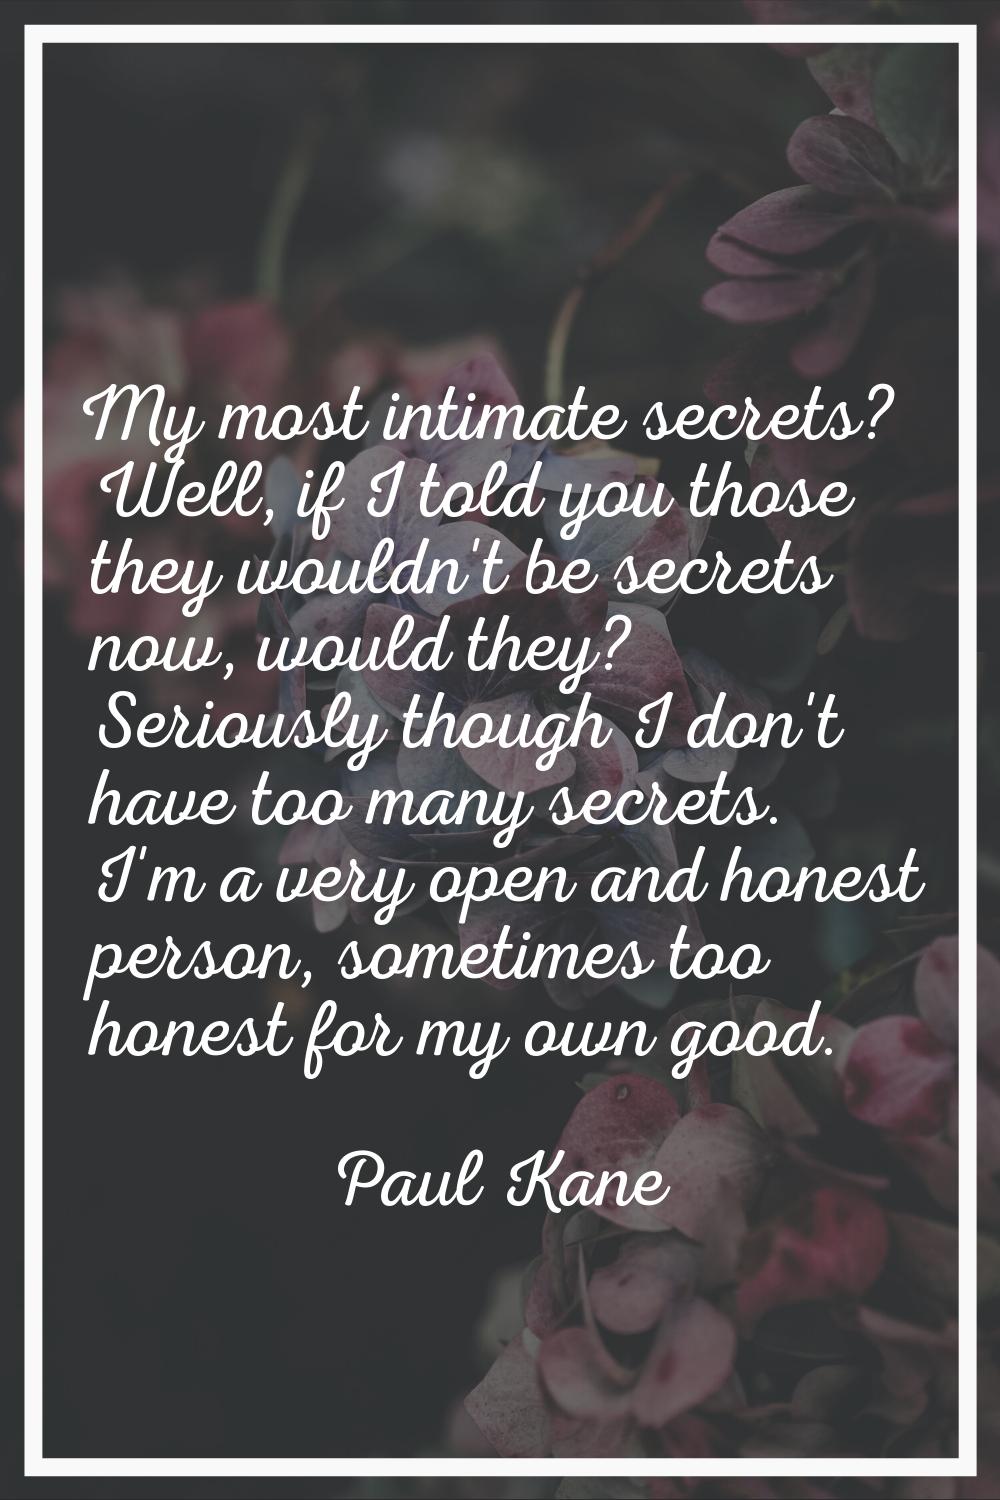 My most intimate secrets? Well, if I told you those they wouldn't be secrets now, would they? Serio